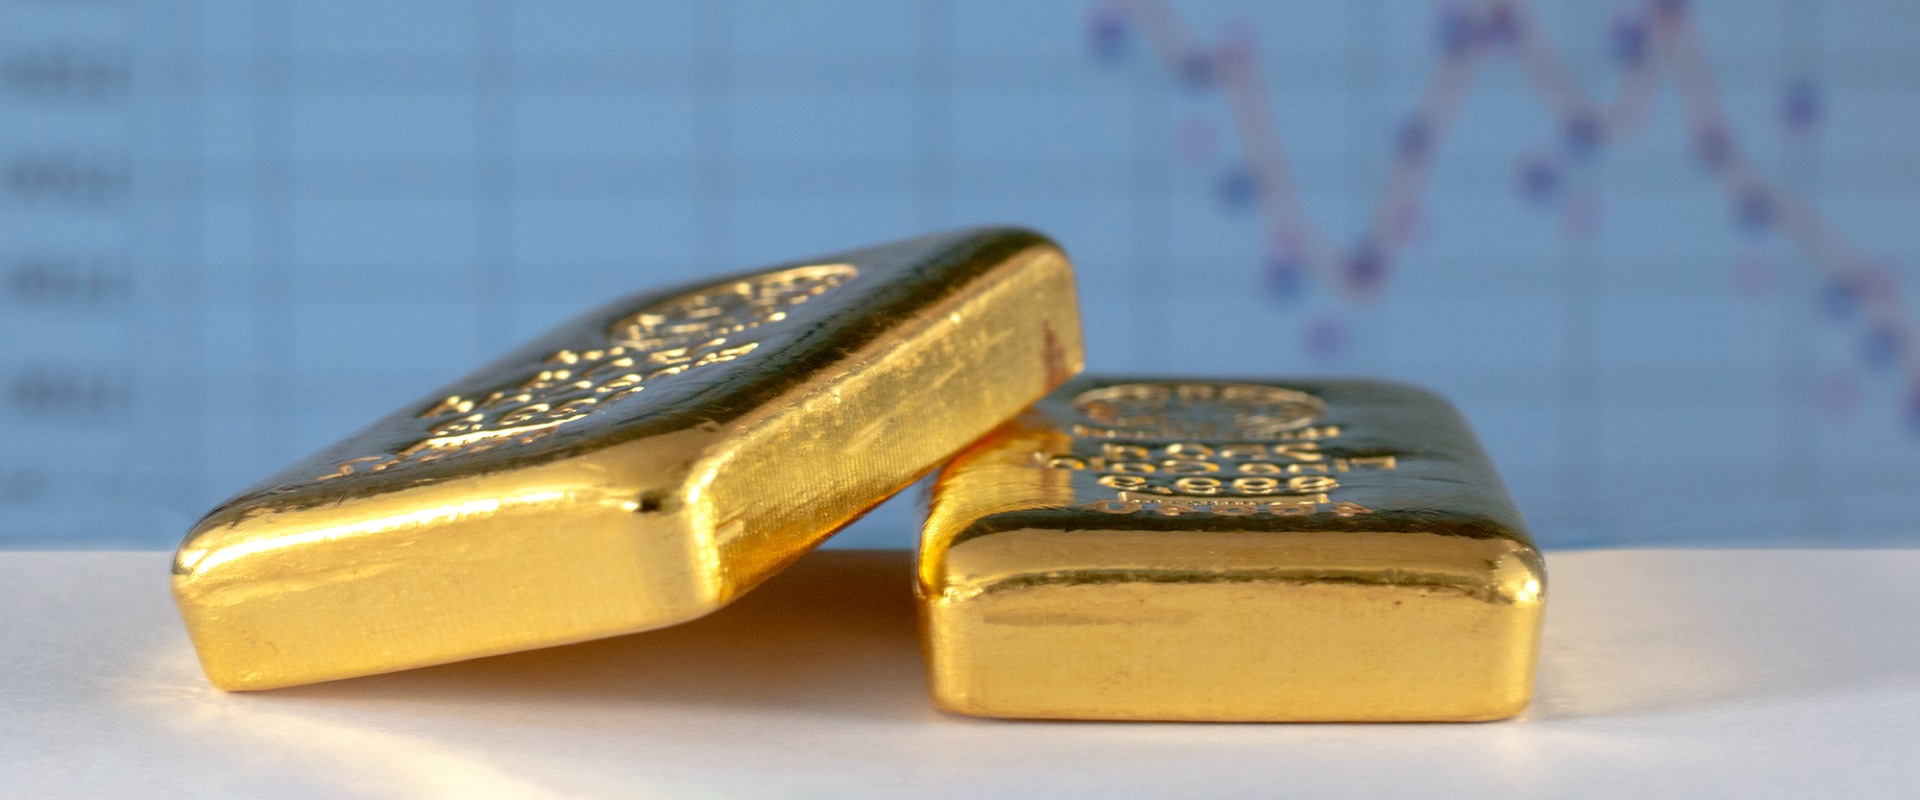 Is gold a secure investment?